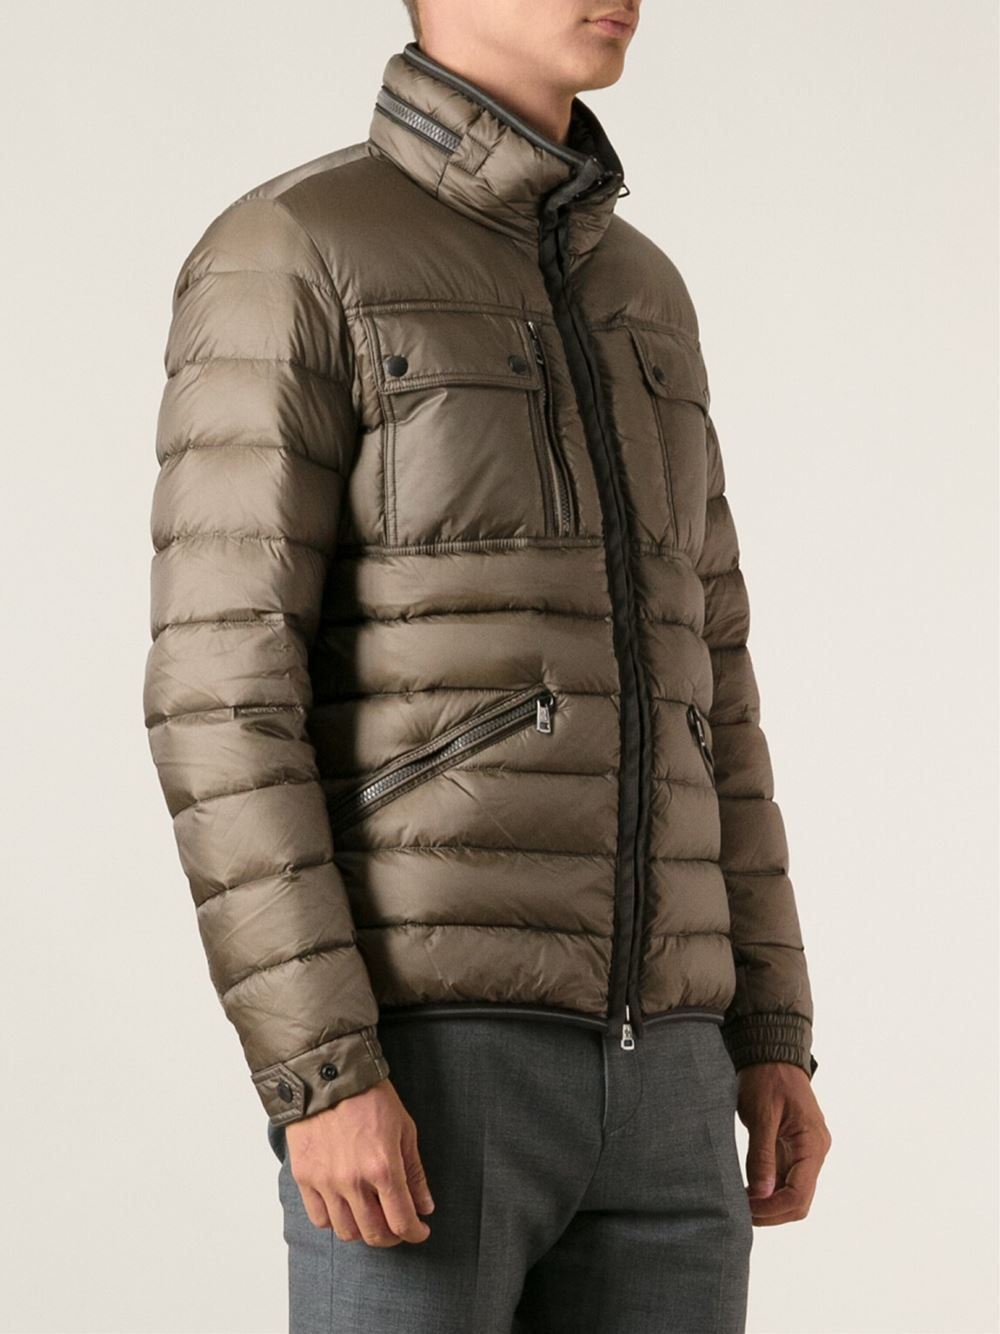 Lyst - Moncler Norbert Padded Jacket in Brown for Men